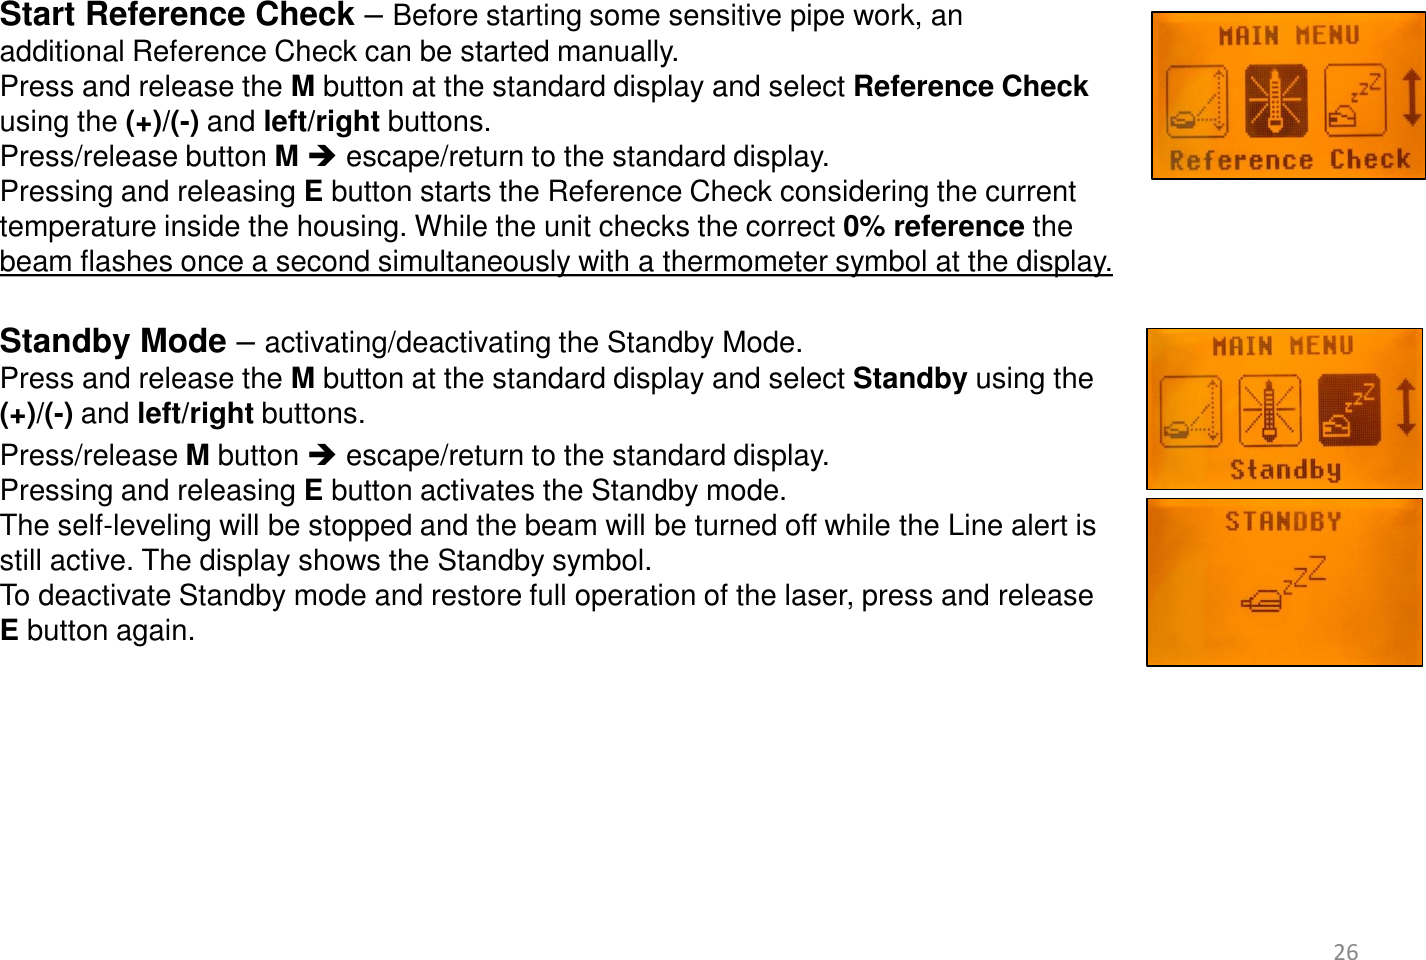  Start Reference Check – Before starting some sensitive pipe work, an  additional Reference Check can be started manually.  Press and release the M button at the standard display and select Reference Check using the (+)/(-) and left/right buttons.  Press/release button M  escape/return to the standard display. Pressing and releasing E button starts the Reference Check considering the current temperature inside the housing. While the unit checks the correct 0% reference the  beam flashes once a second simultaneously with a thermometer symbol at the display.  Standby Mode – activating/deactivating the Standby Mode.  Press and release the M button at the standard display and select Standby using the  (+)/(-) and left/right buttons.   Press/release M button  escape/return to the standard display. Pressing and releasing E button activates the Standby mode.  The self-leveling will be stopped and the beam will be turned off while the Line alert is  still active. The display shows the Standby symbol. To deactivate Standby mode and restore full operation of the laser, press and release  E button again.   26 